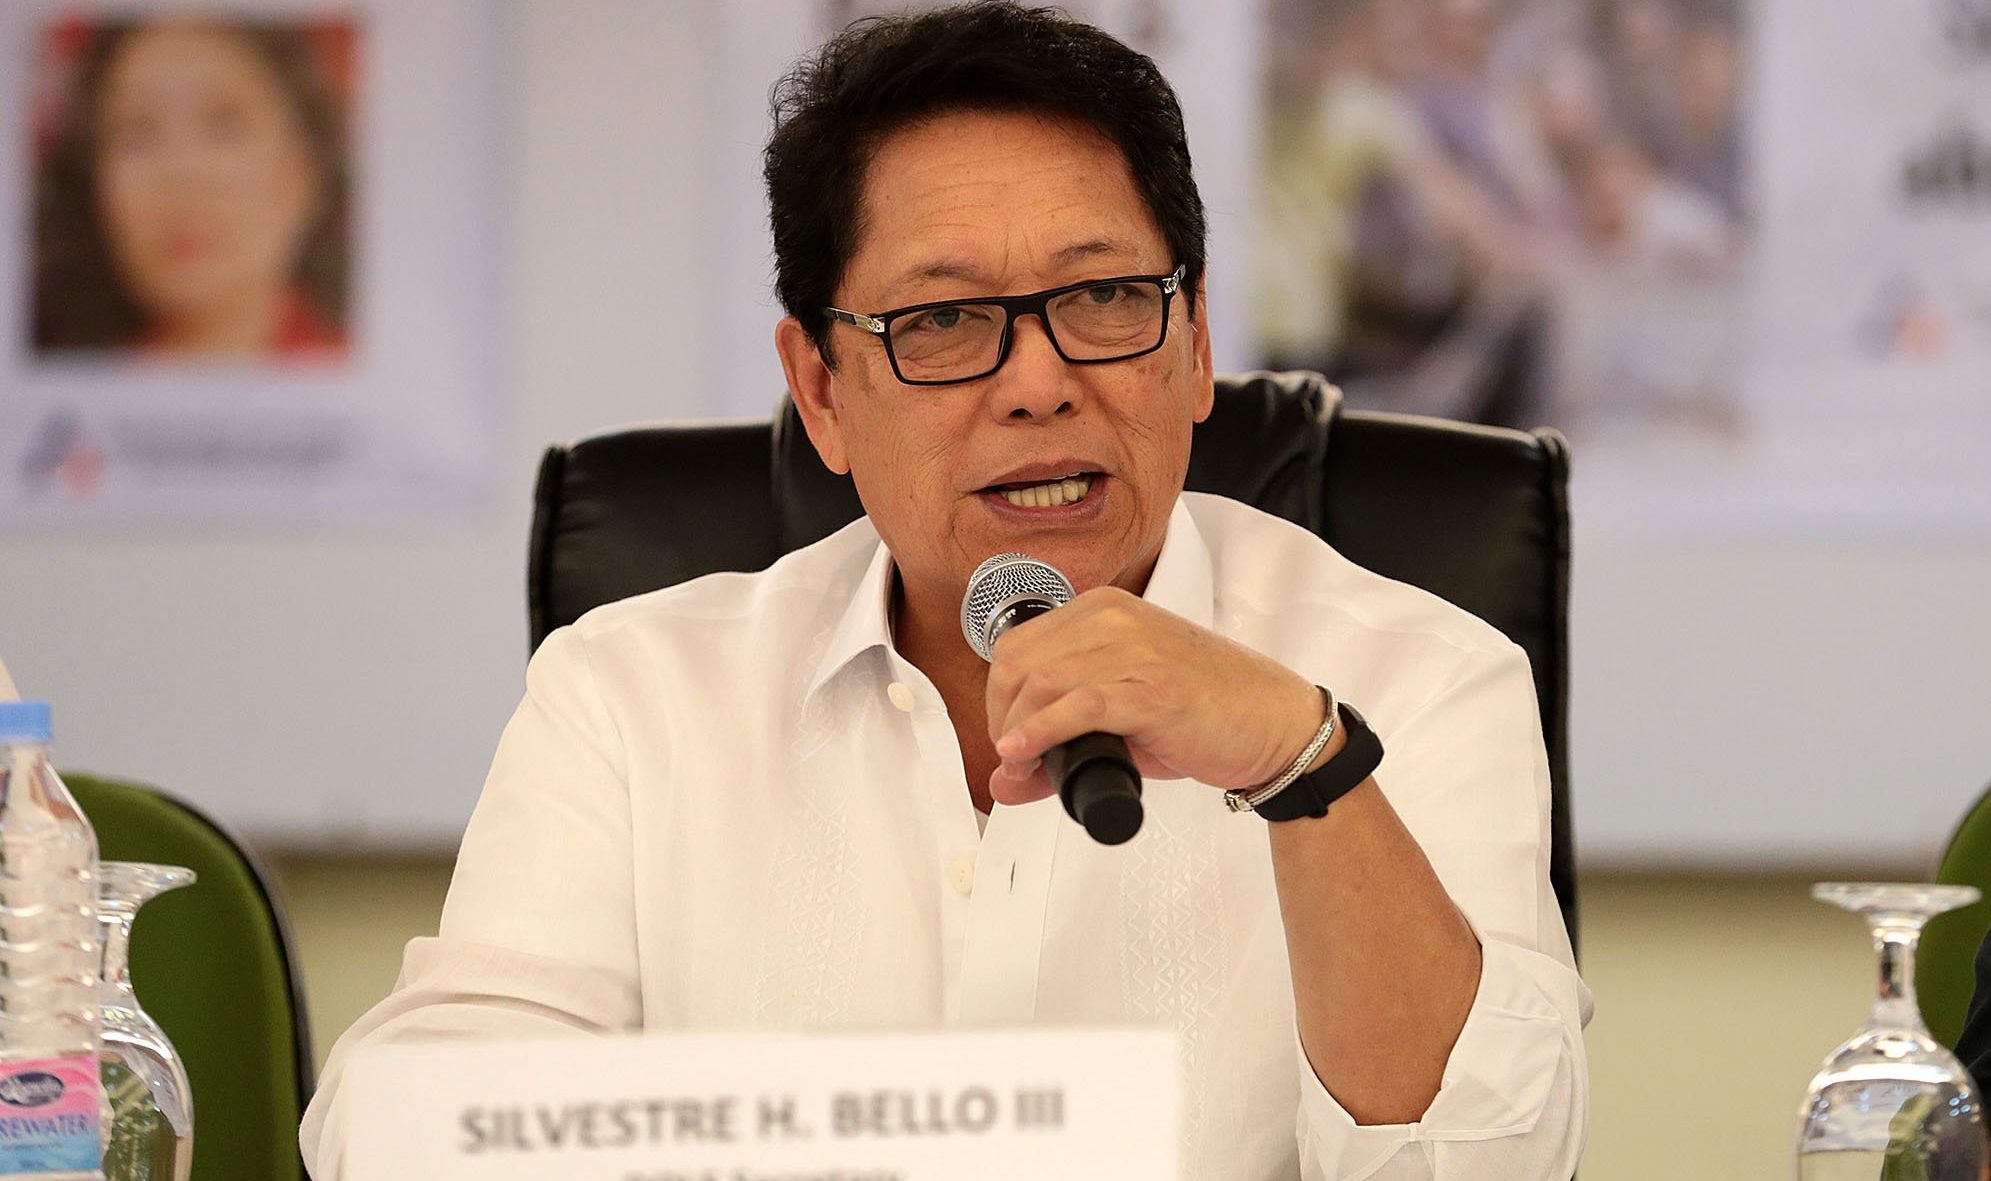 Bello linked to extortion, says PACC exec